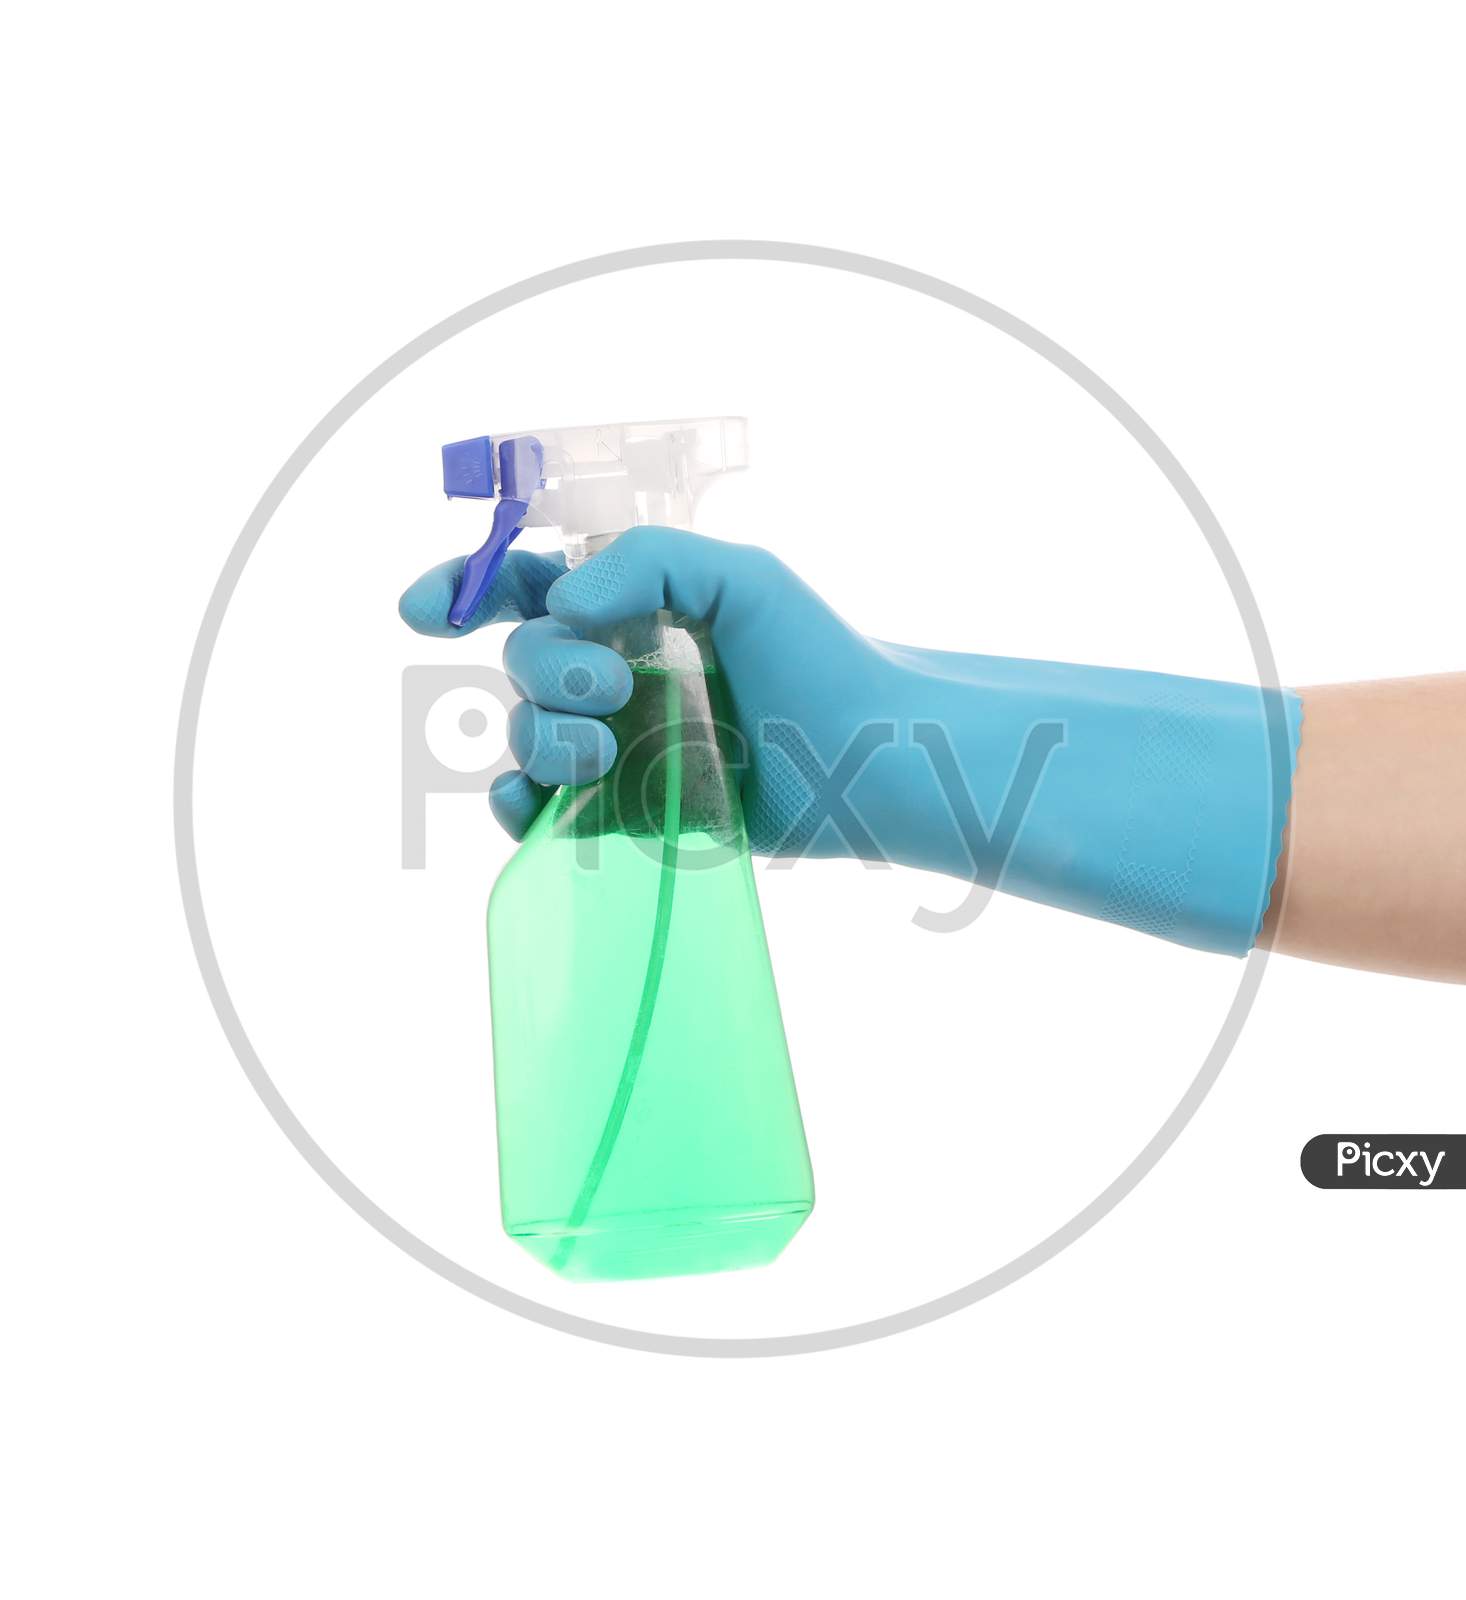 Hand In Gloves Holds Spray Bottle. Isolated On A White Background.